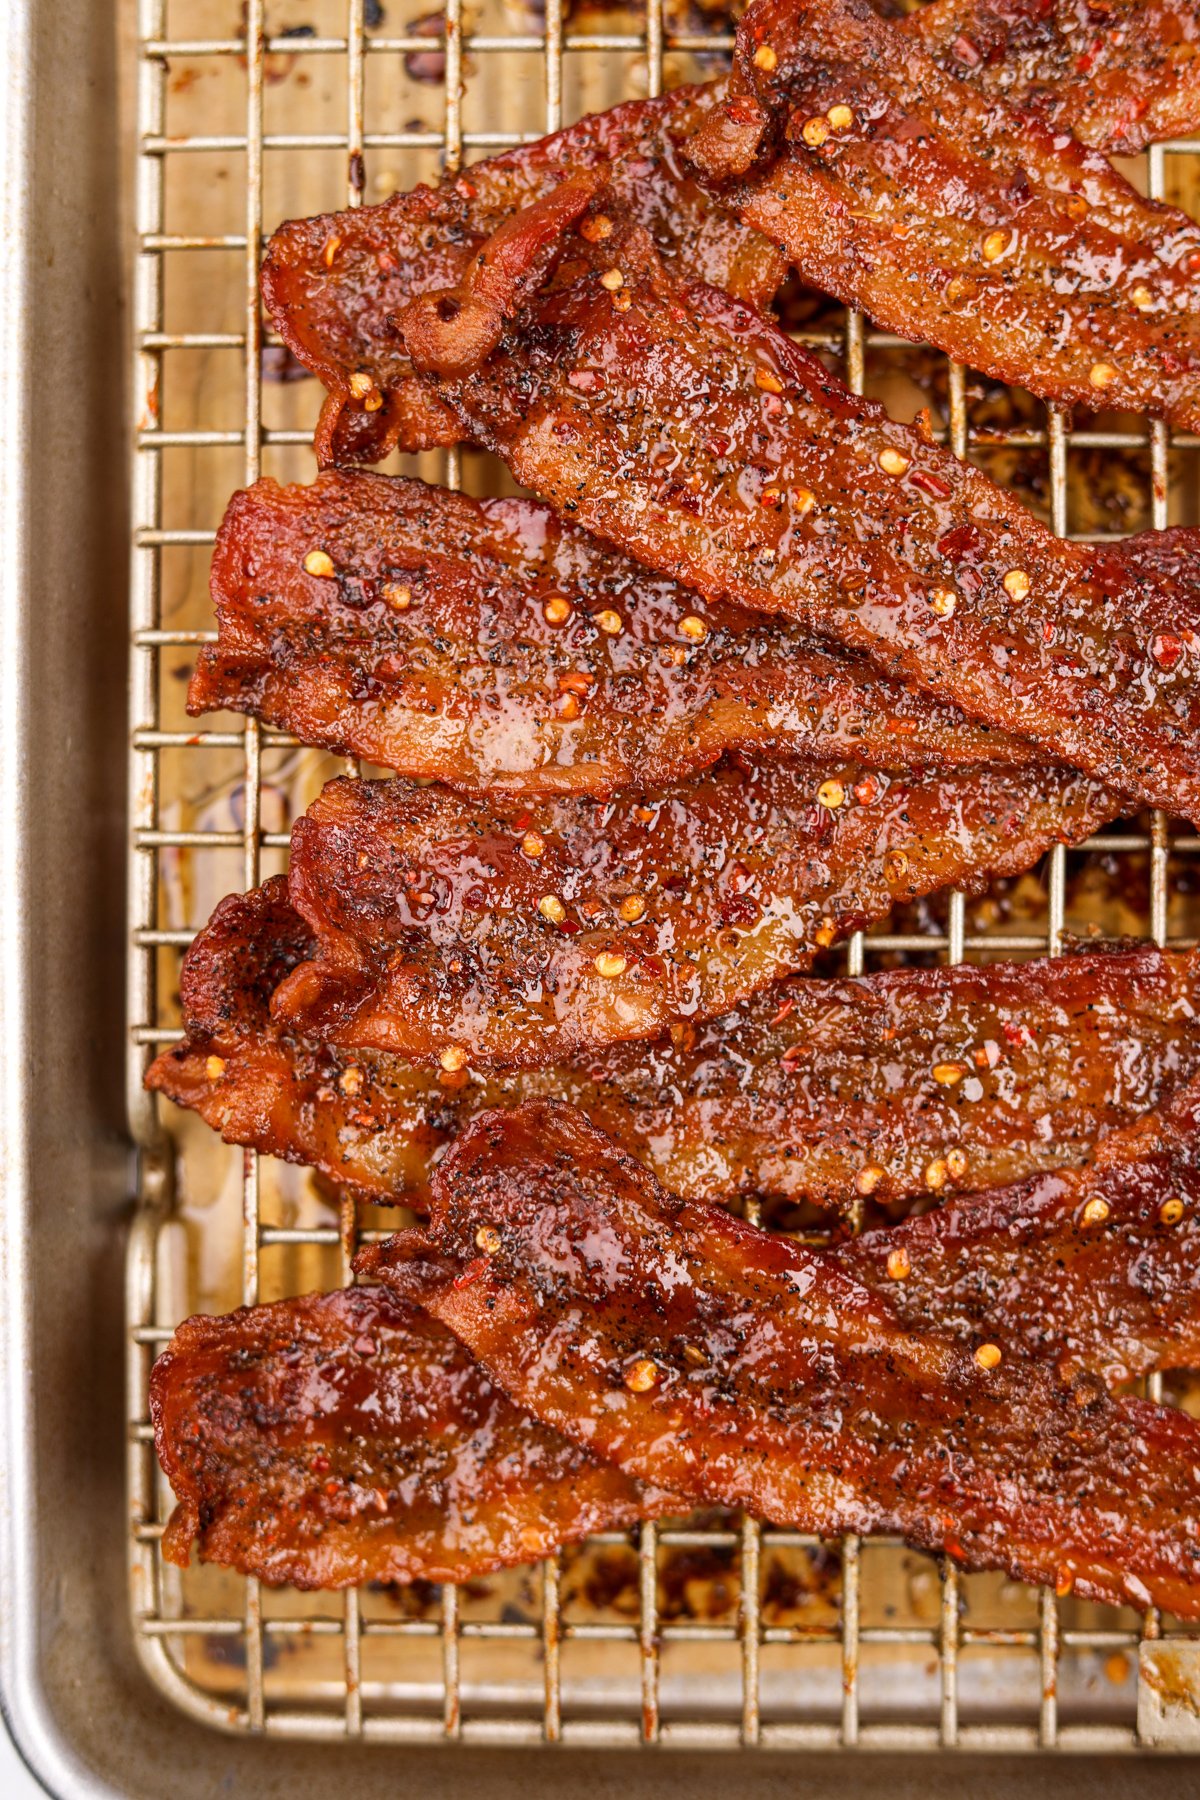 Bacon that has been candied with brown sugar and is stacked on a wire baking rack.